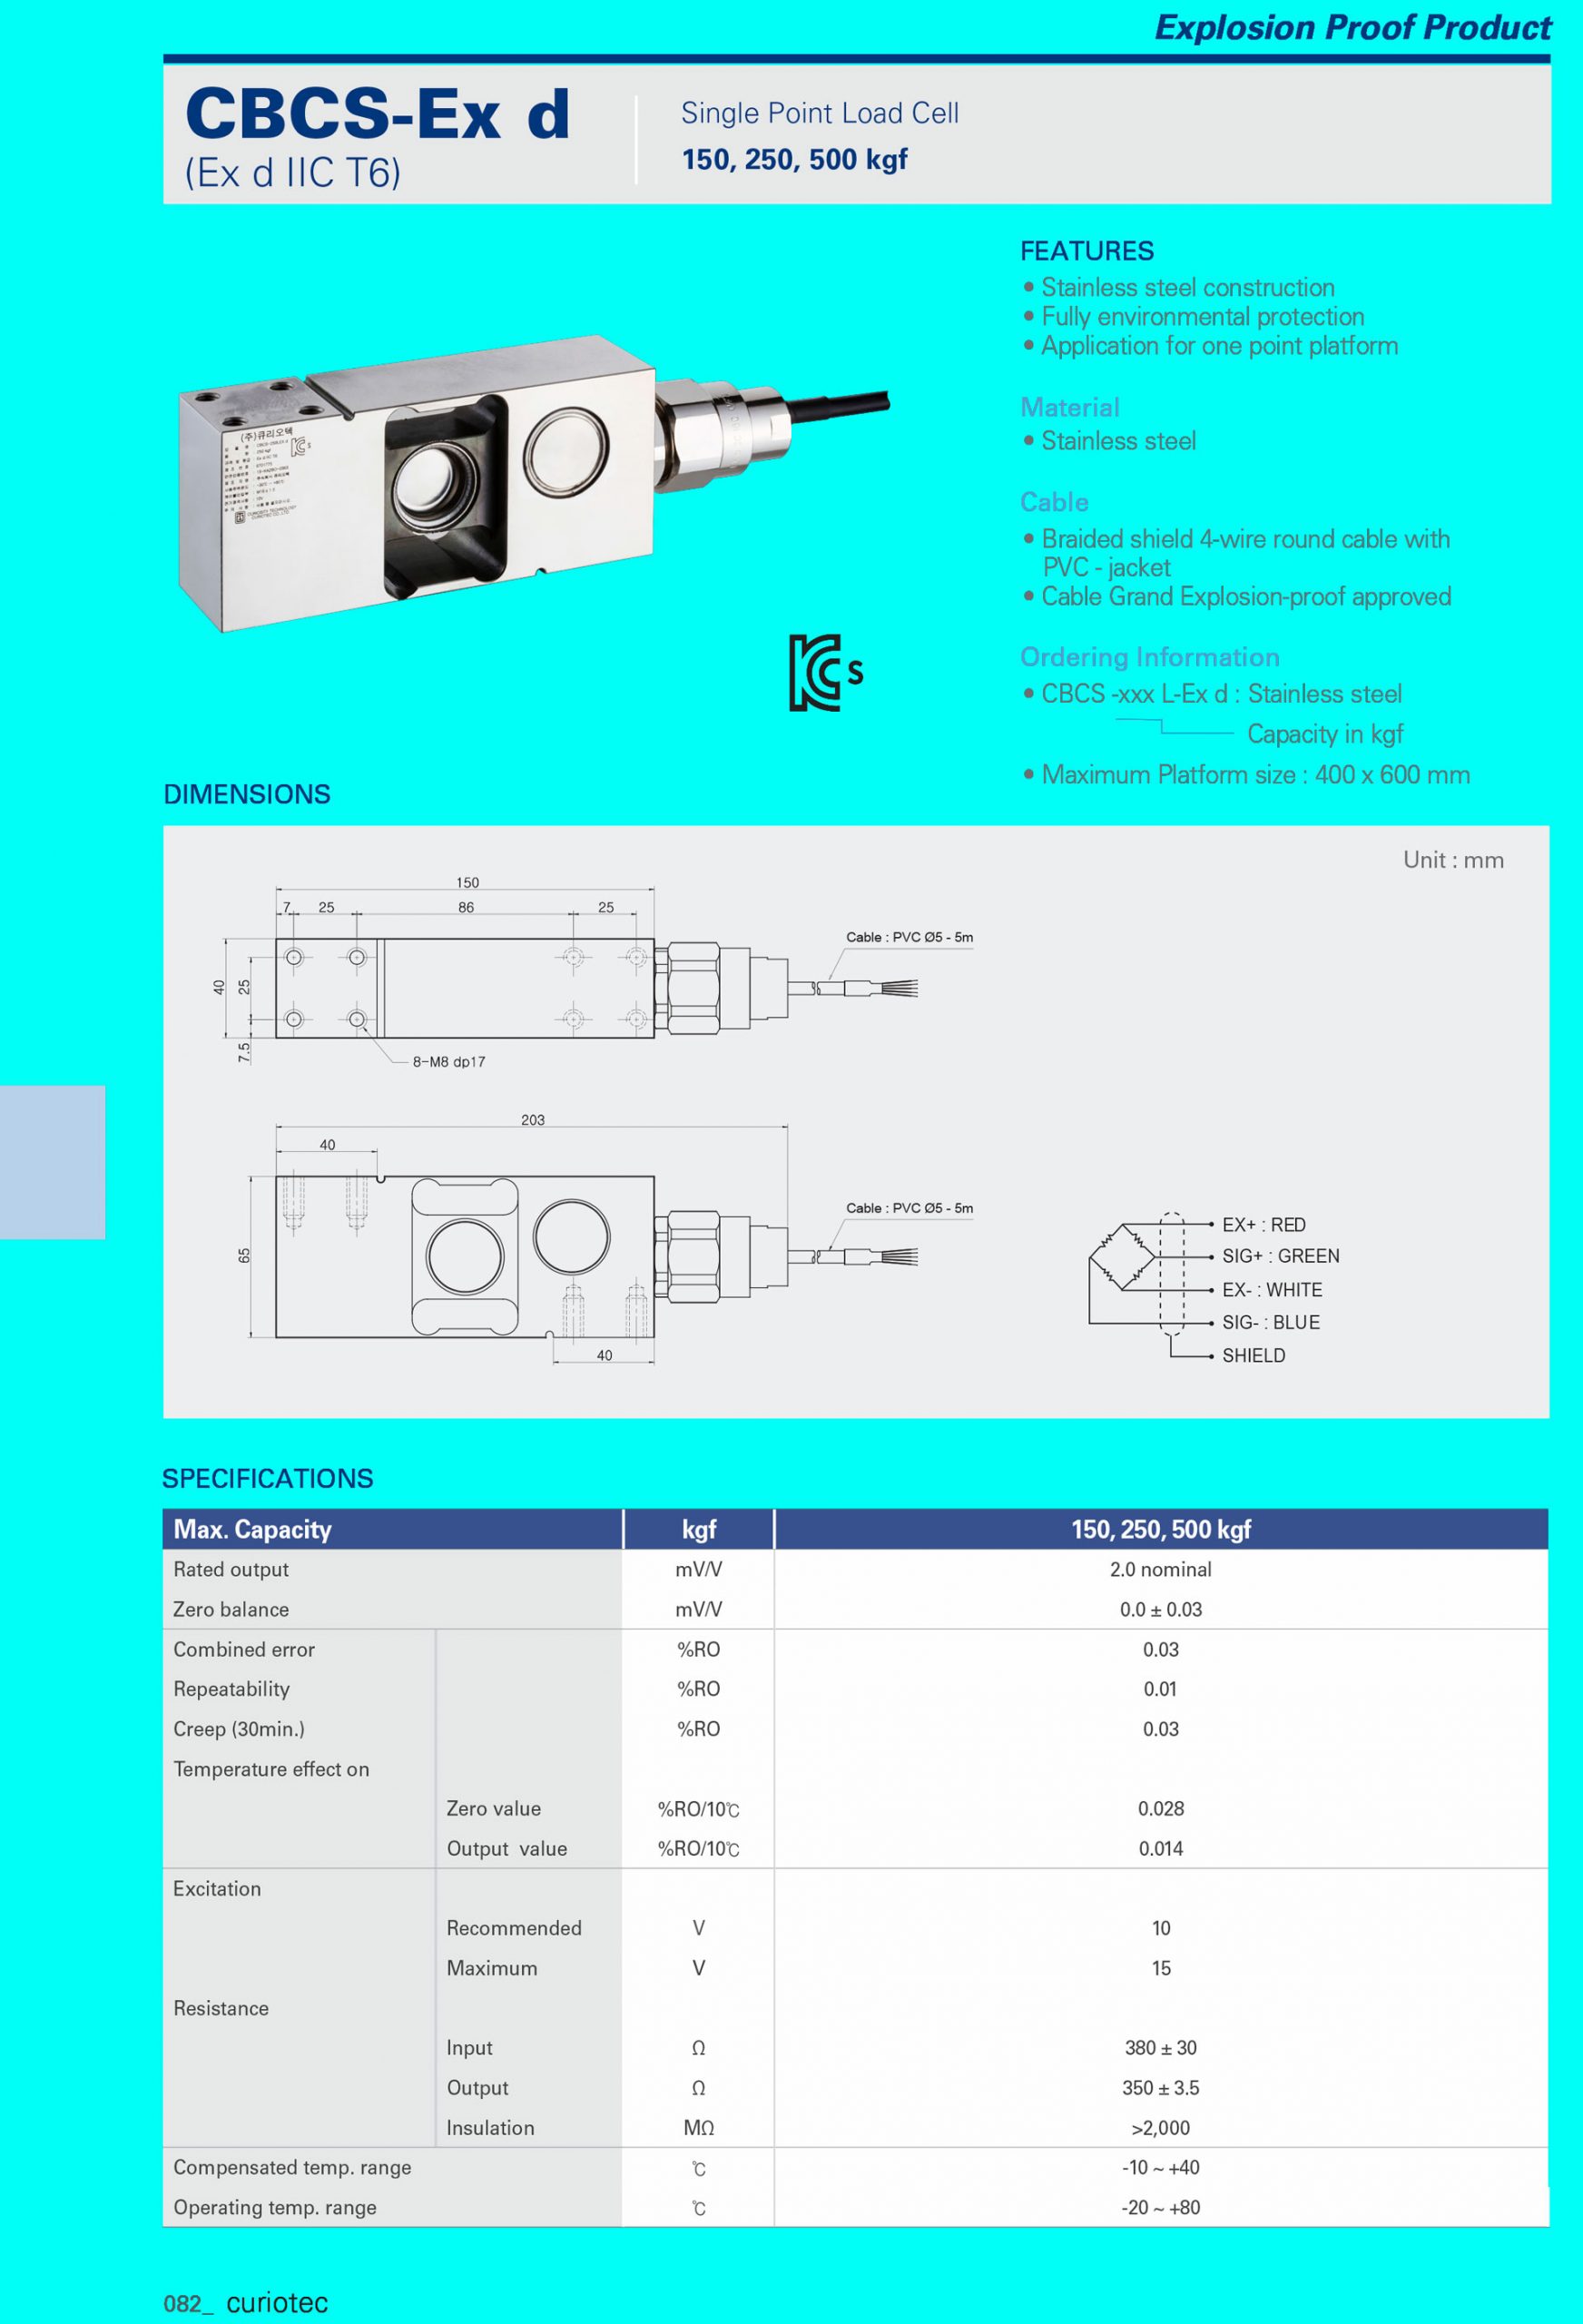 loadcell-CBCS-Ex-d